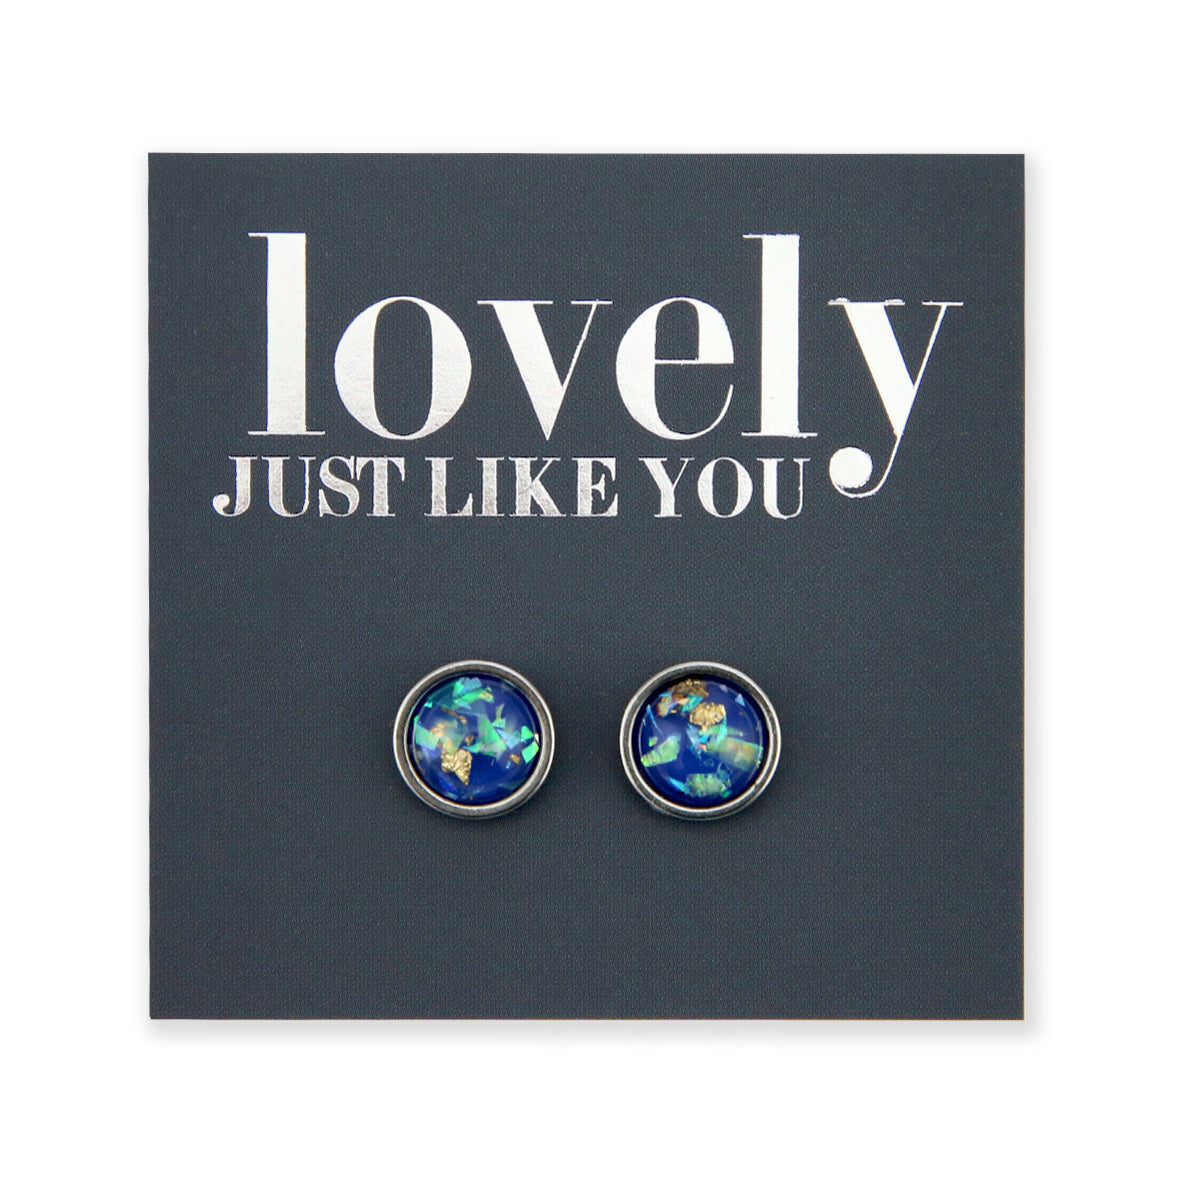 Lovely Just Like You - Silver Stainless Steel 8mm Circle Studs - Galaxy  (11345)